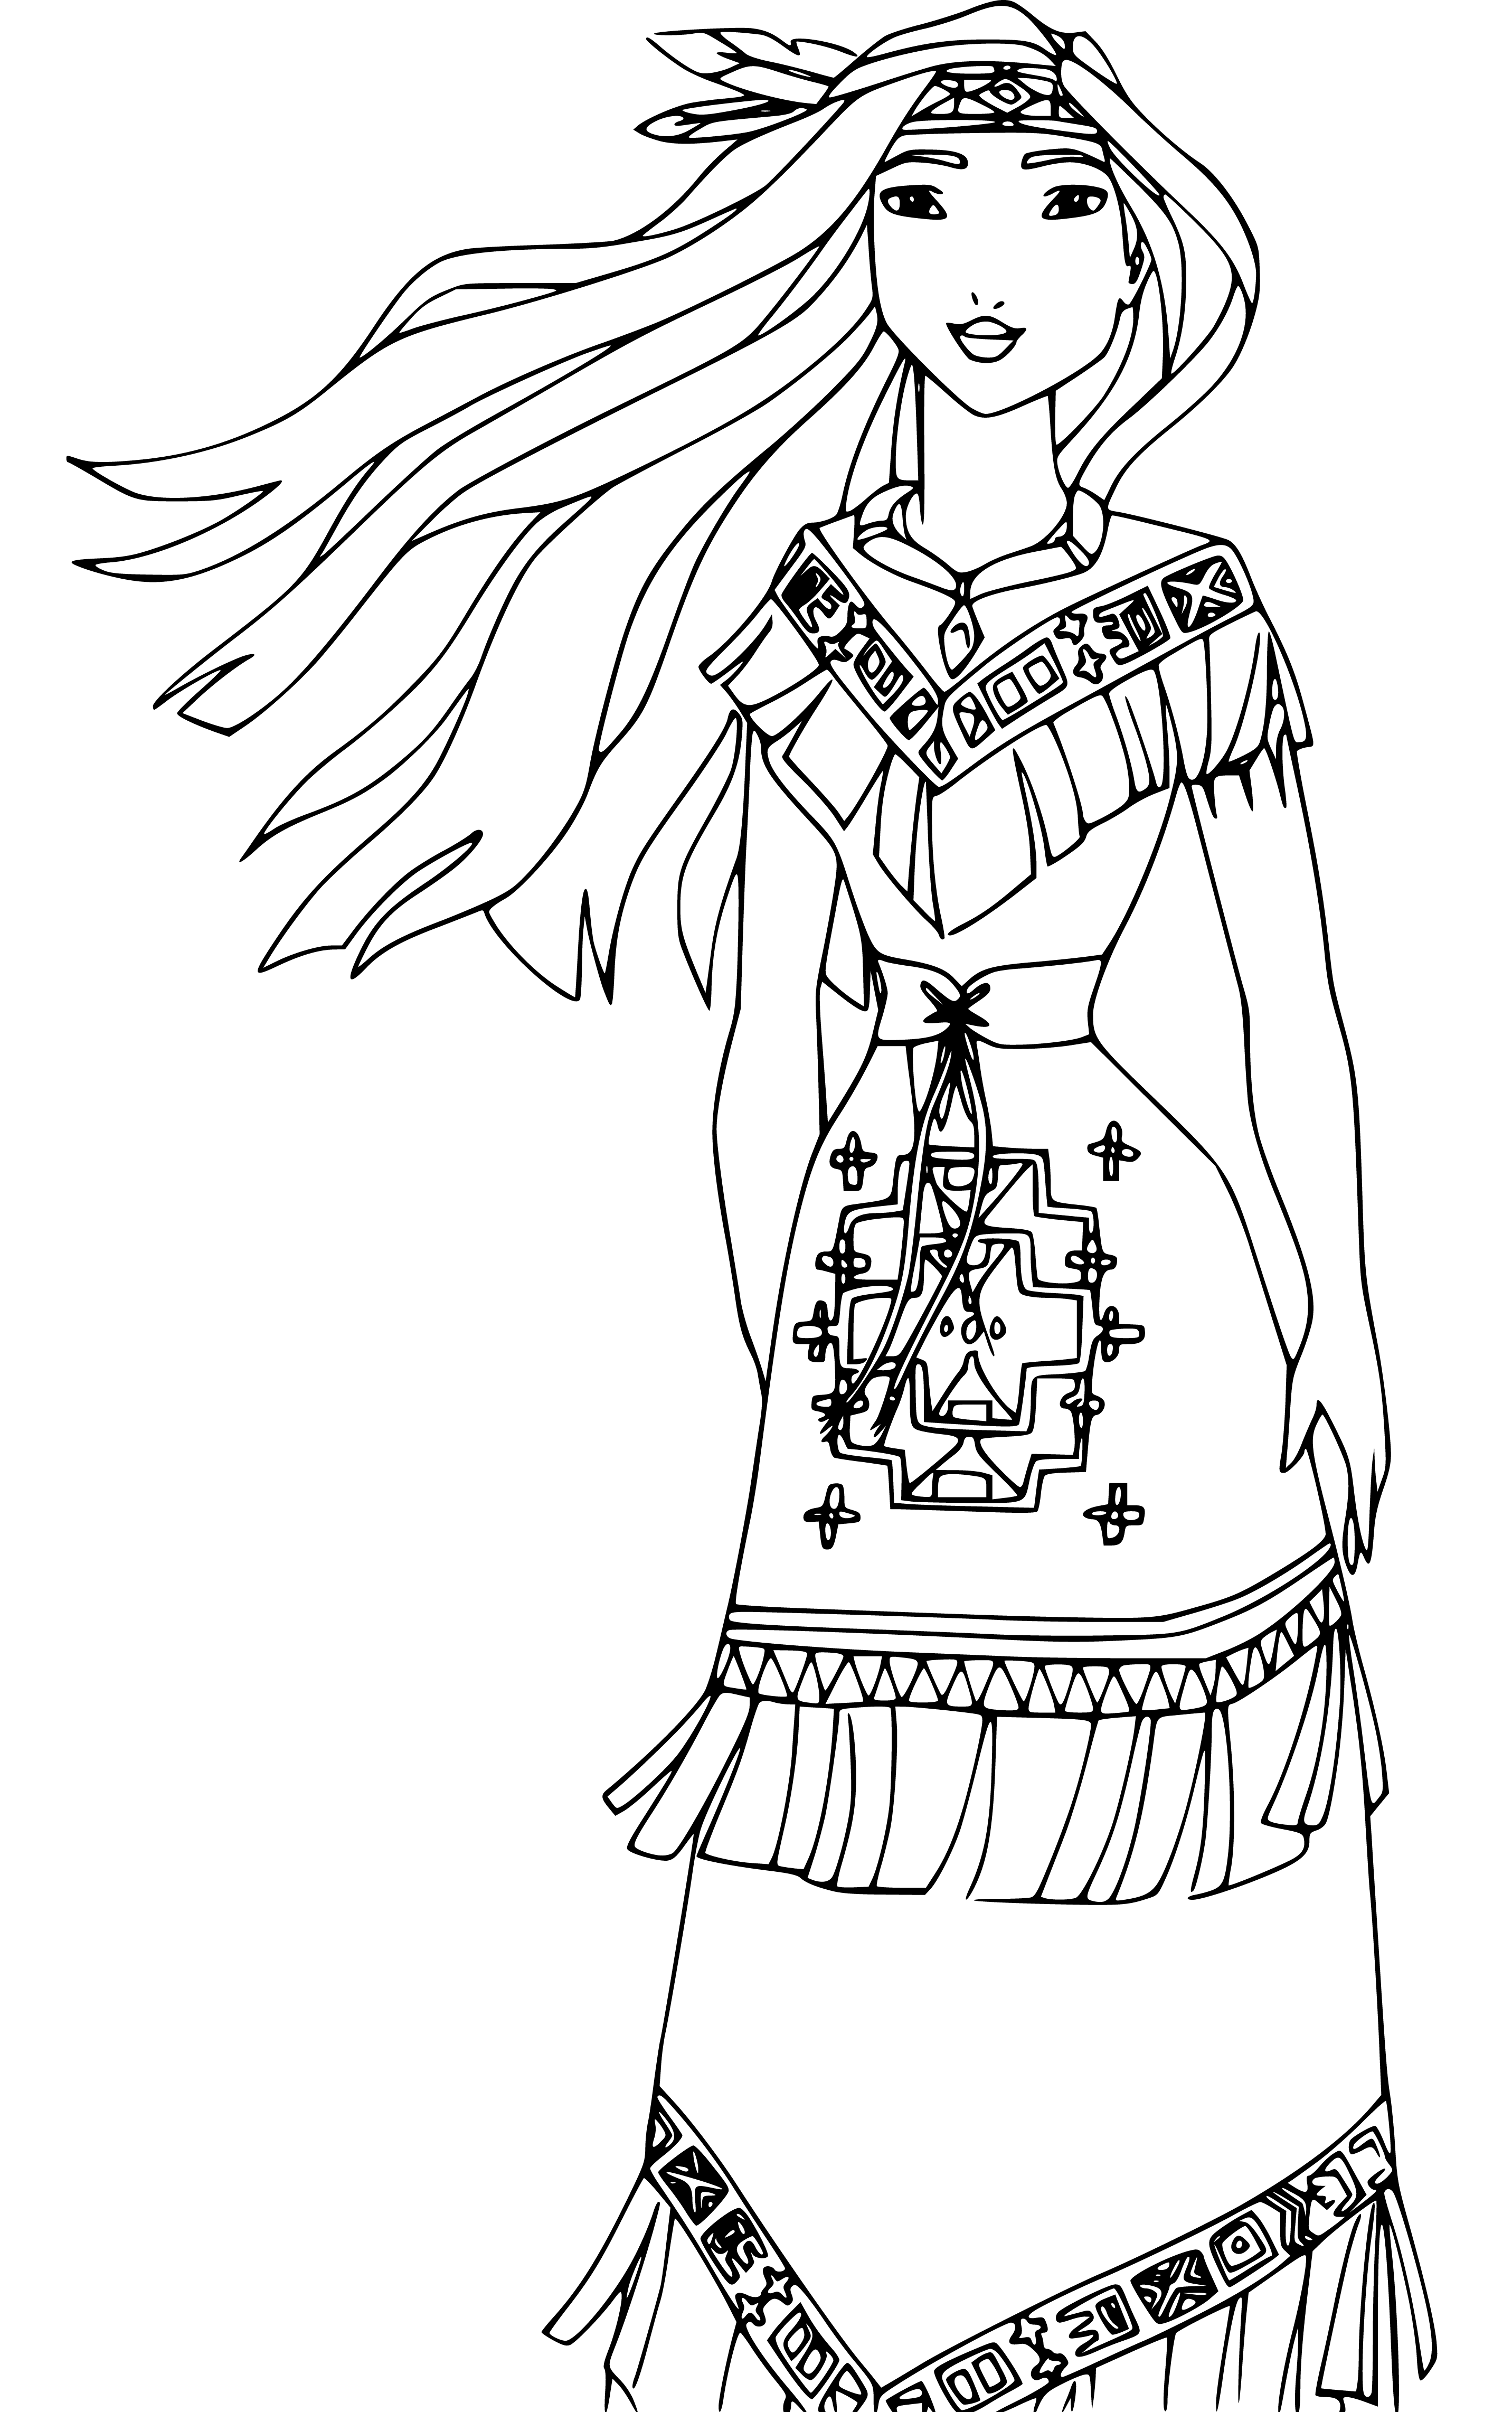 Printable Lovely Pocahontas Coloring Page for kids.